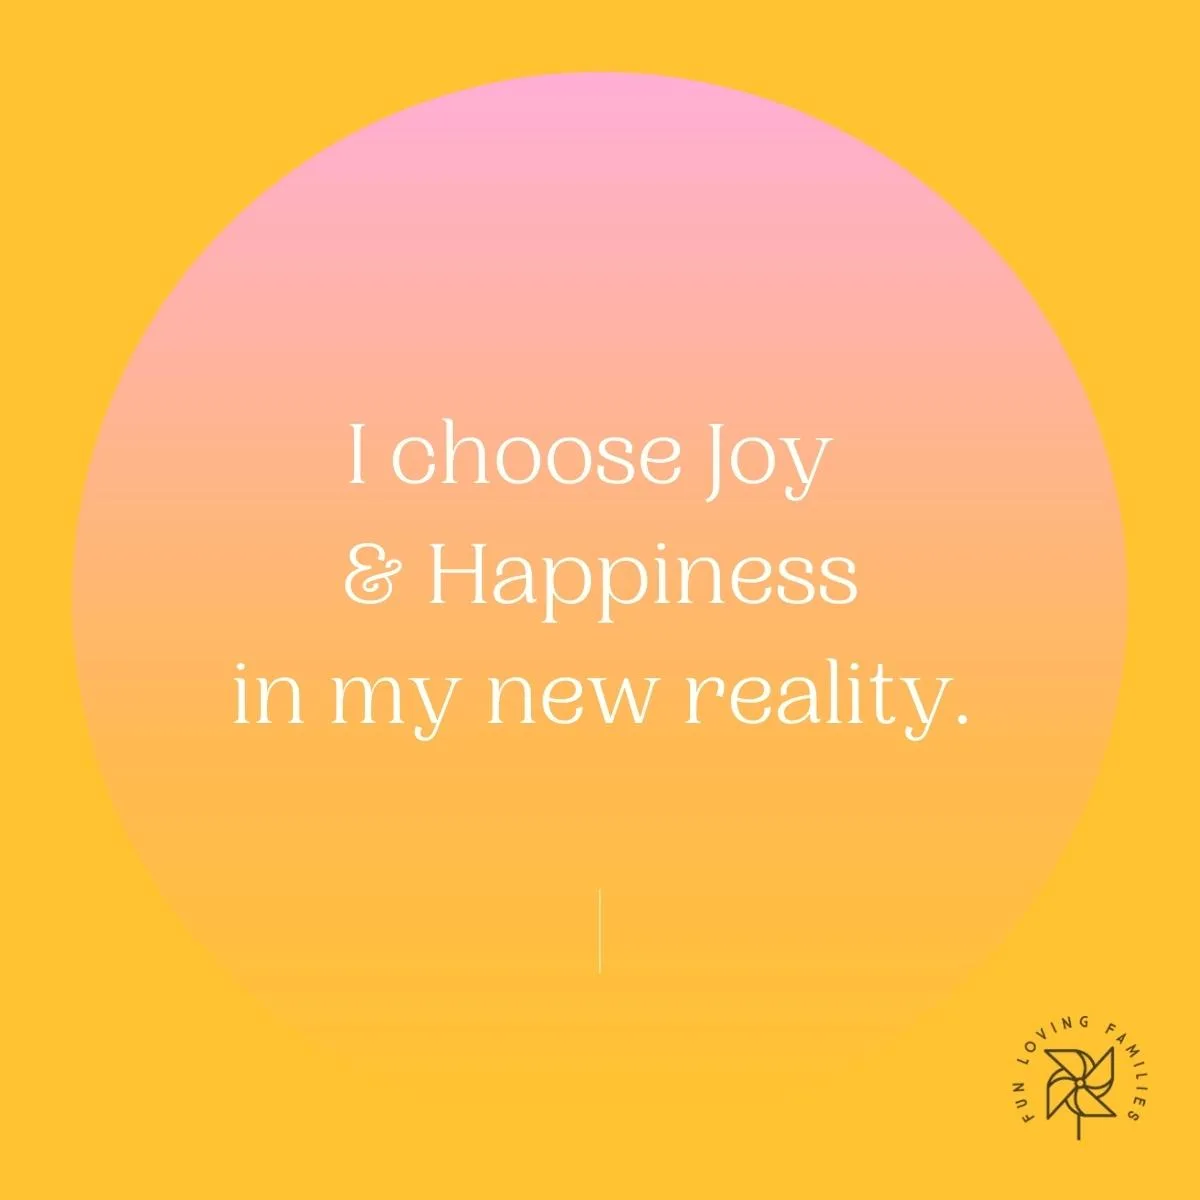 I choose joy and happiness in my new reality affirmation